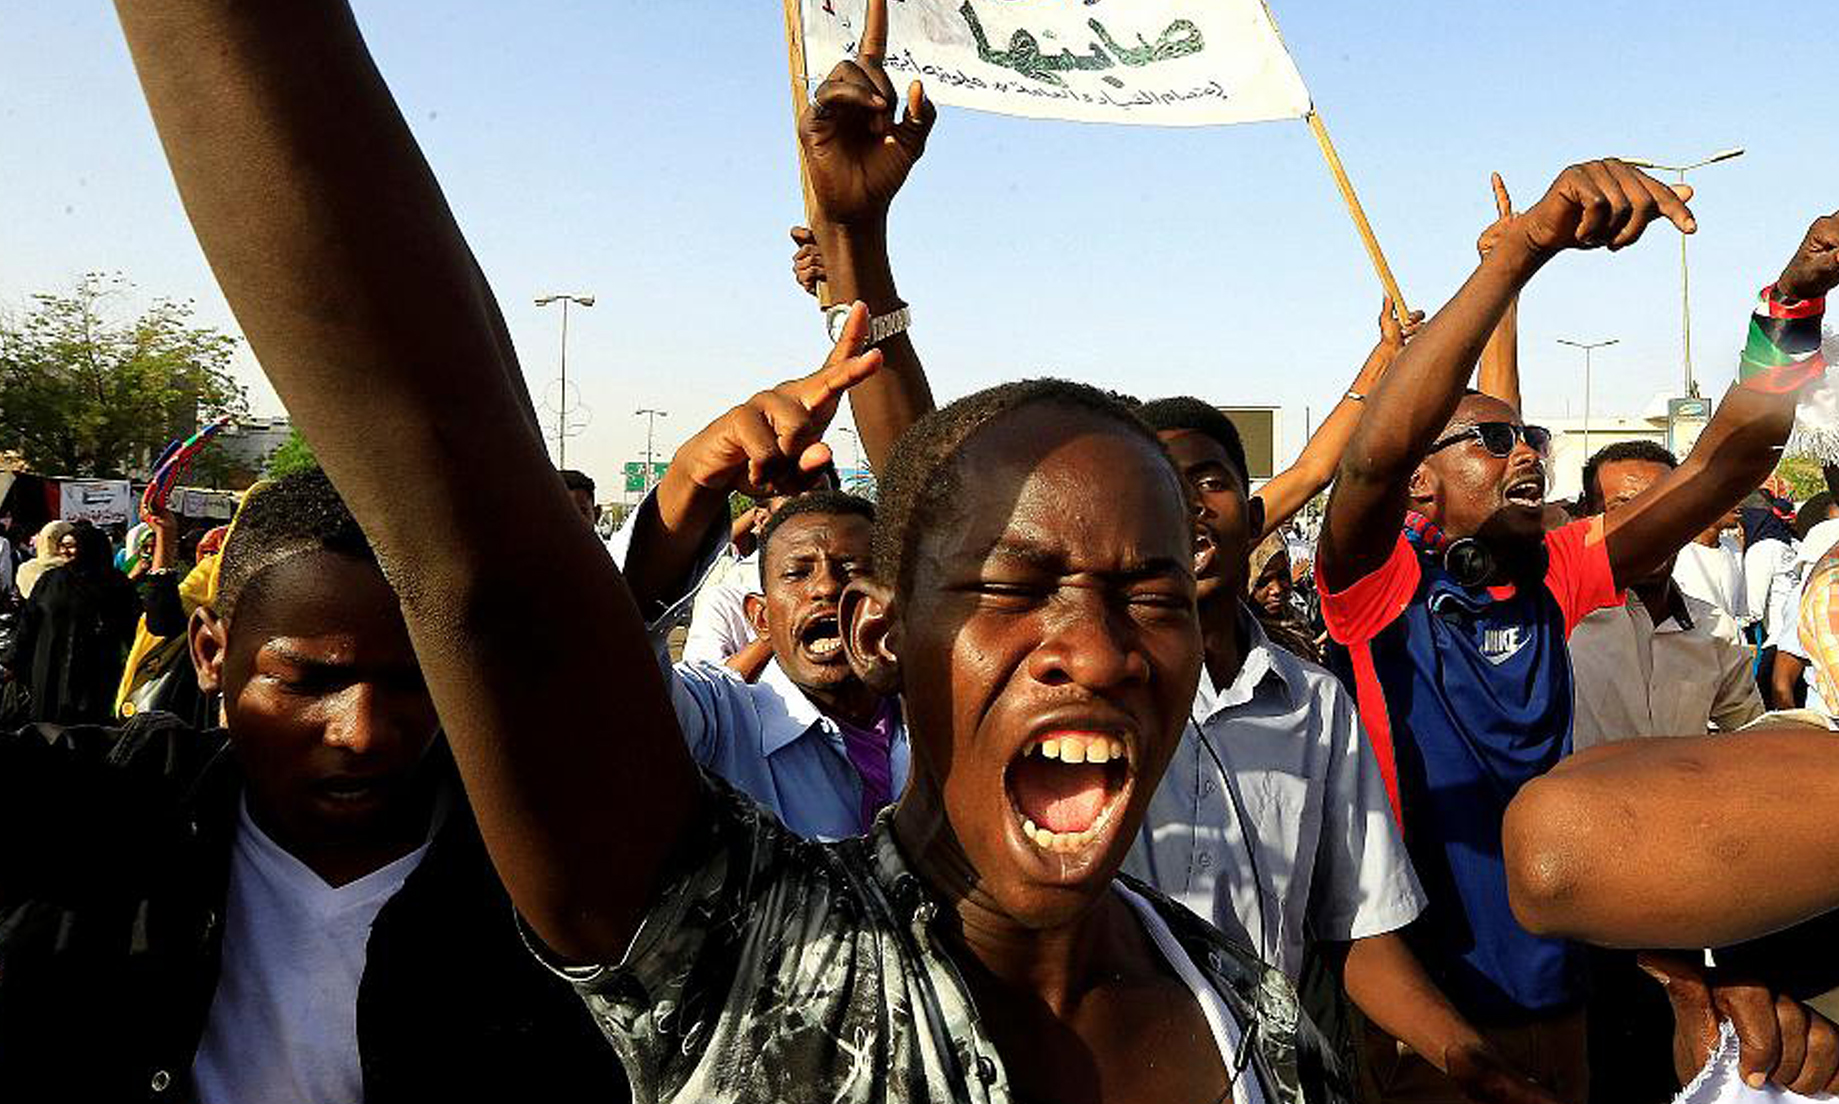 87 killed, 168 wounded in Sudan’s deadly crackdown